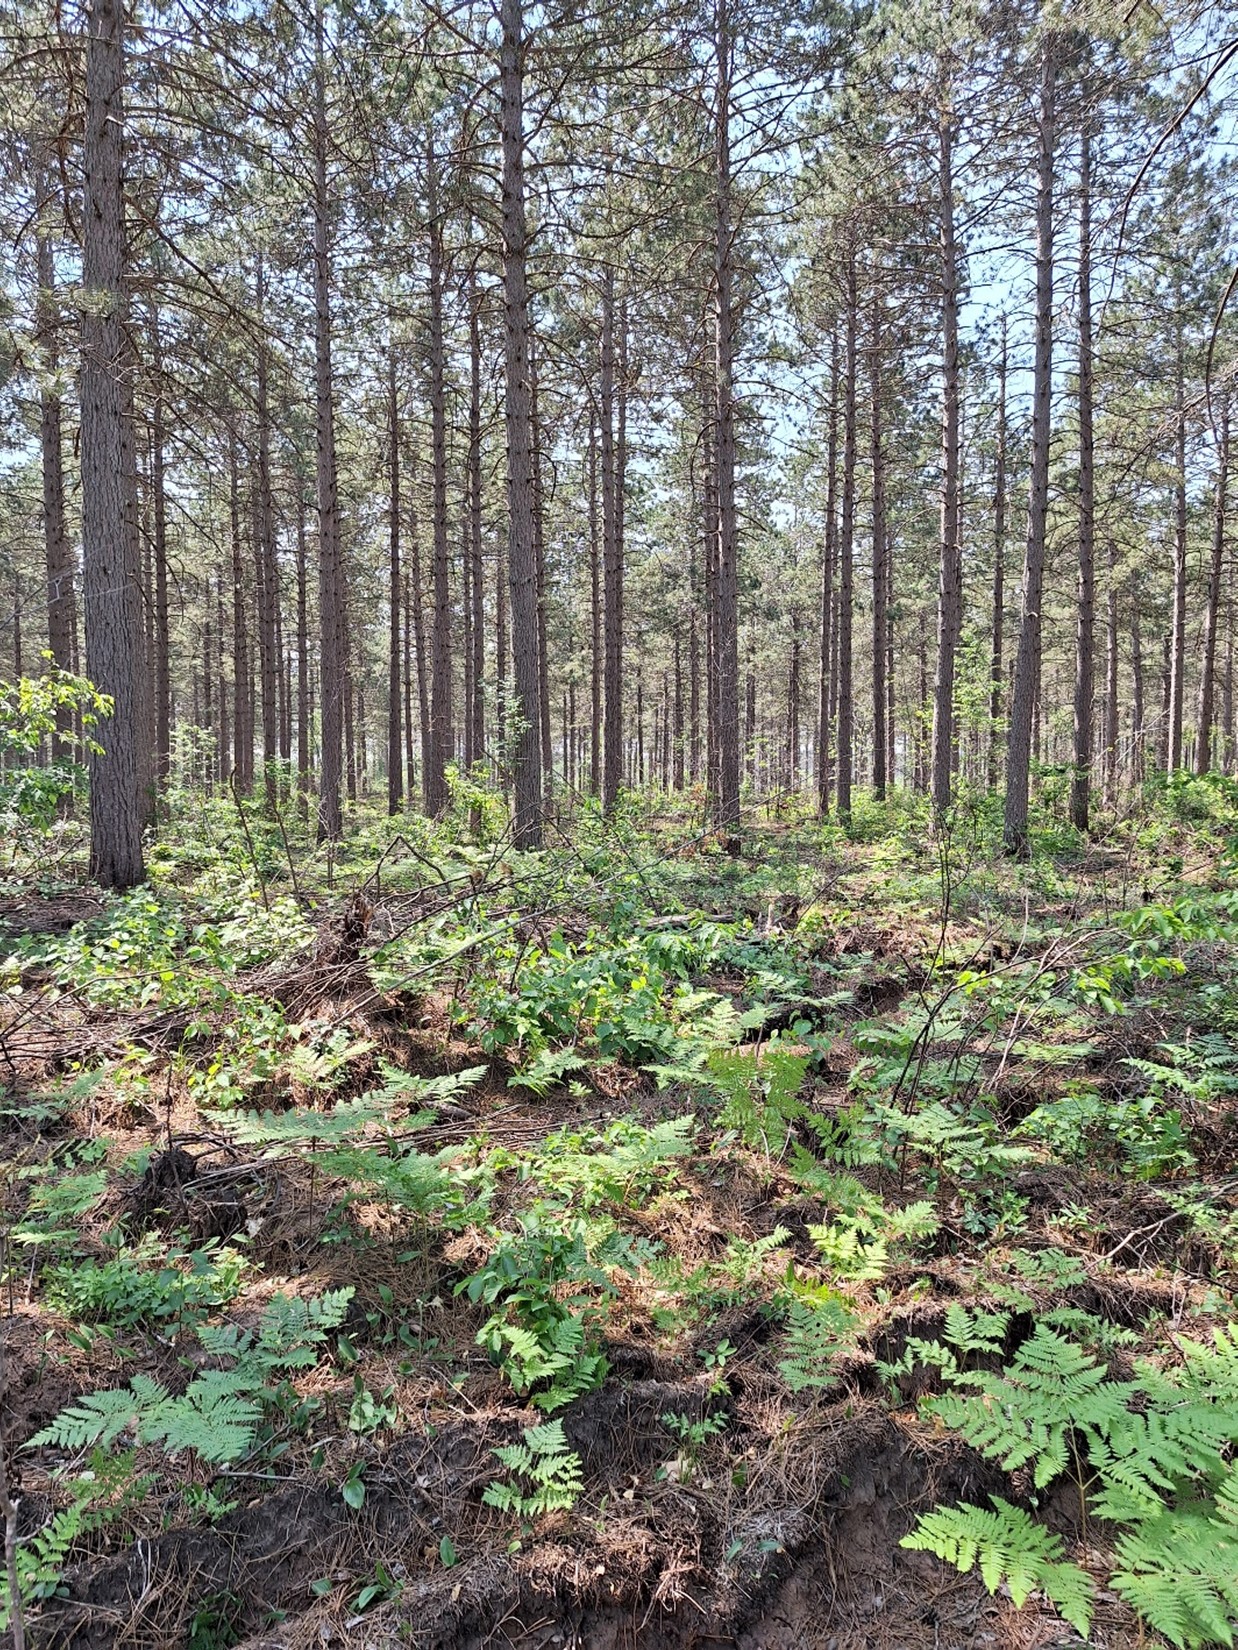 Woody competition is still well controlled on June 20, 2023, a year after Velpar application - most understory vegetation seen here is bracken fern